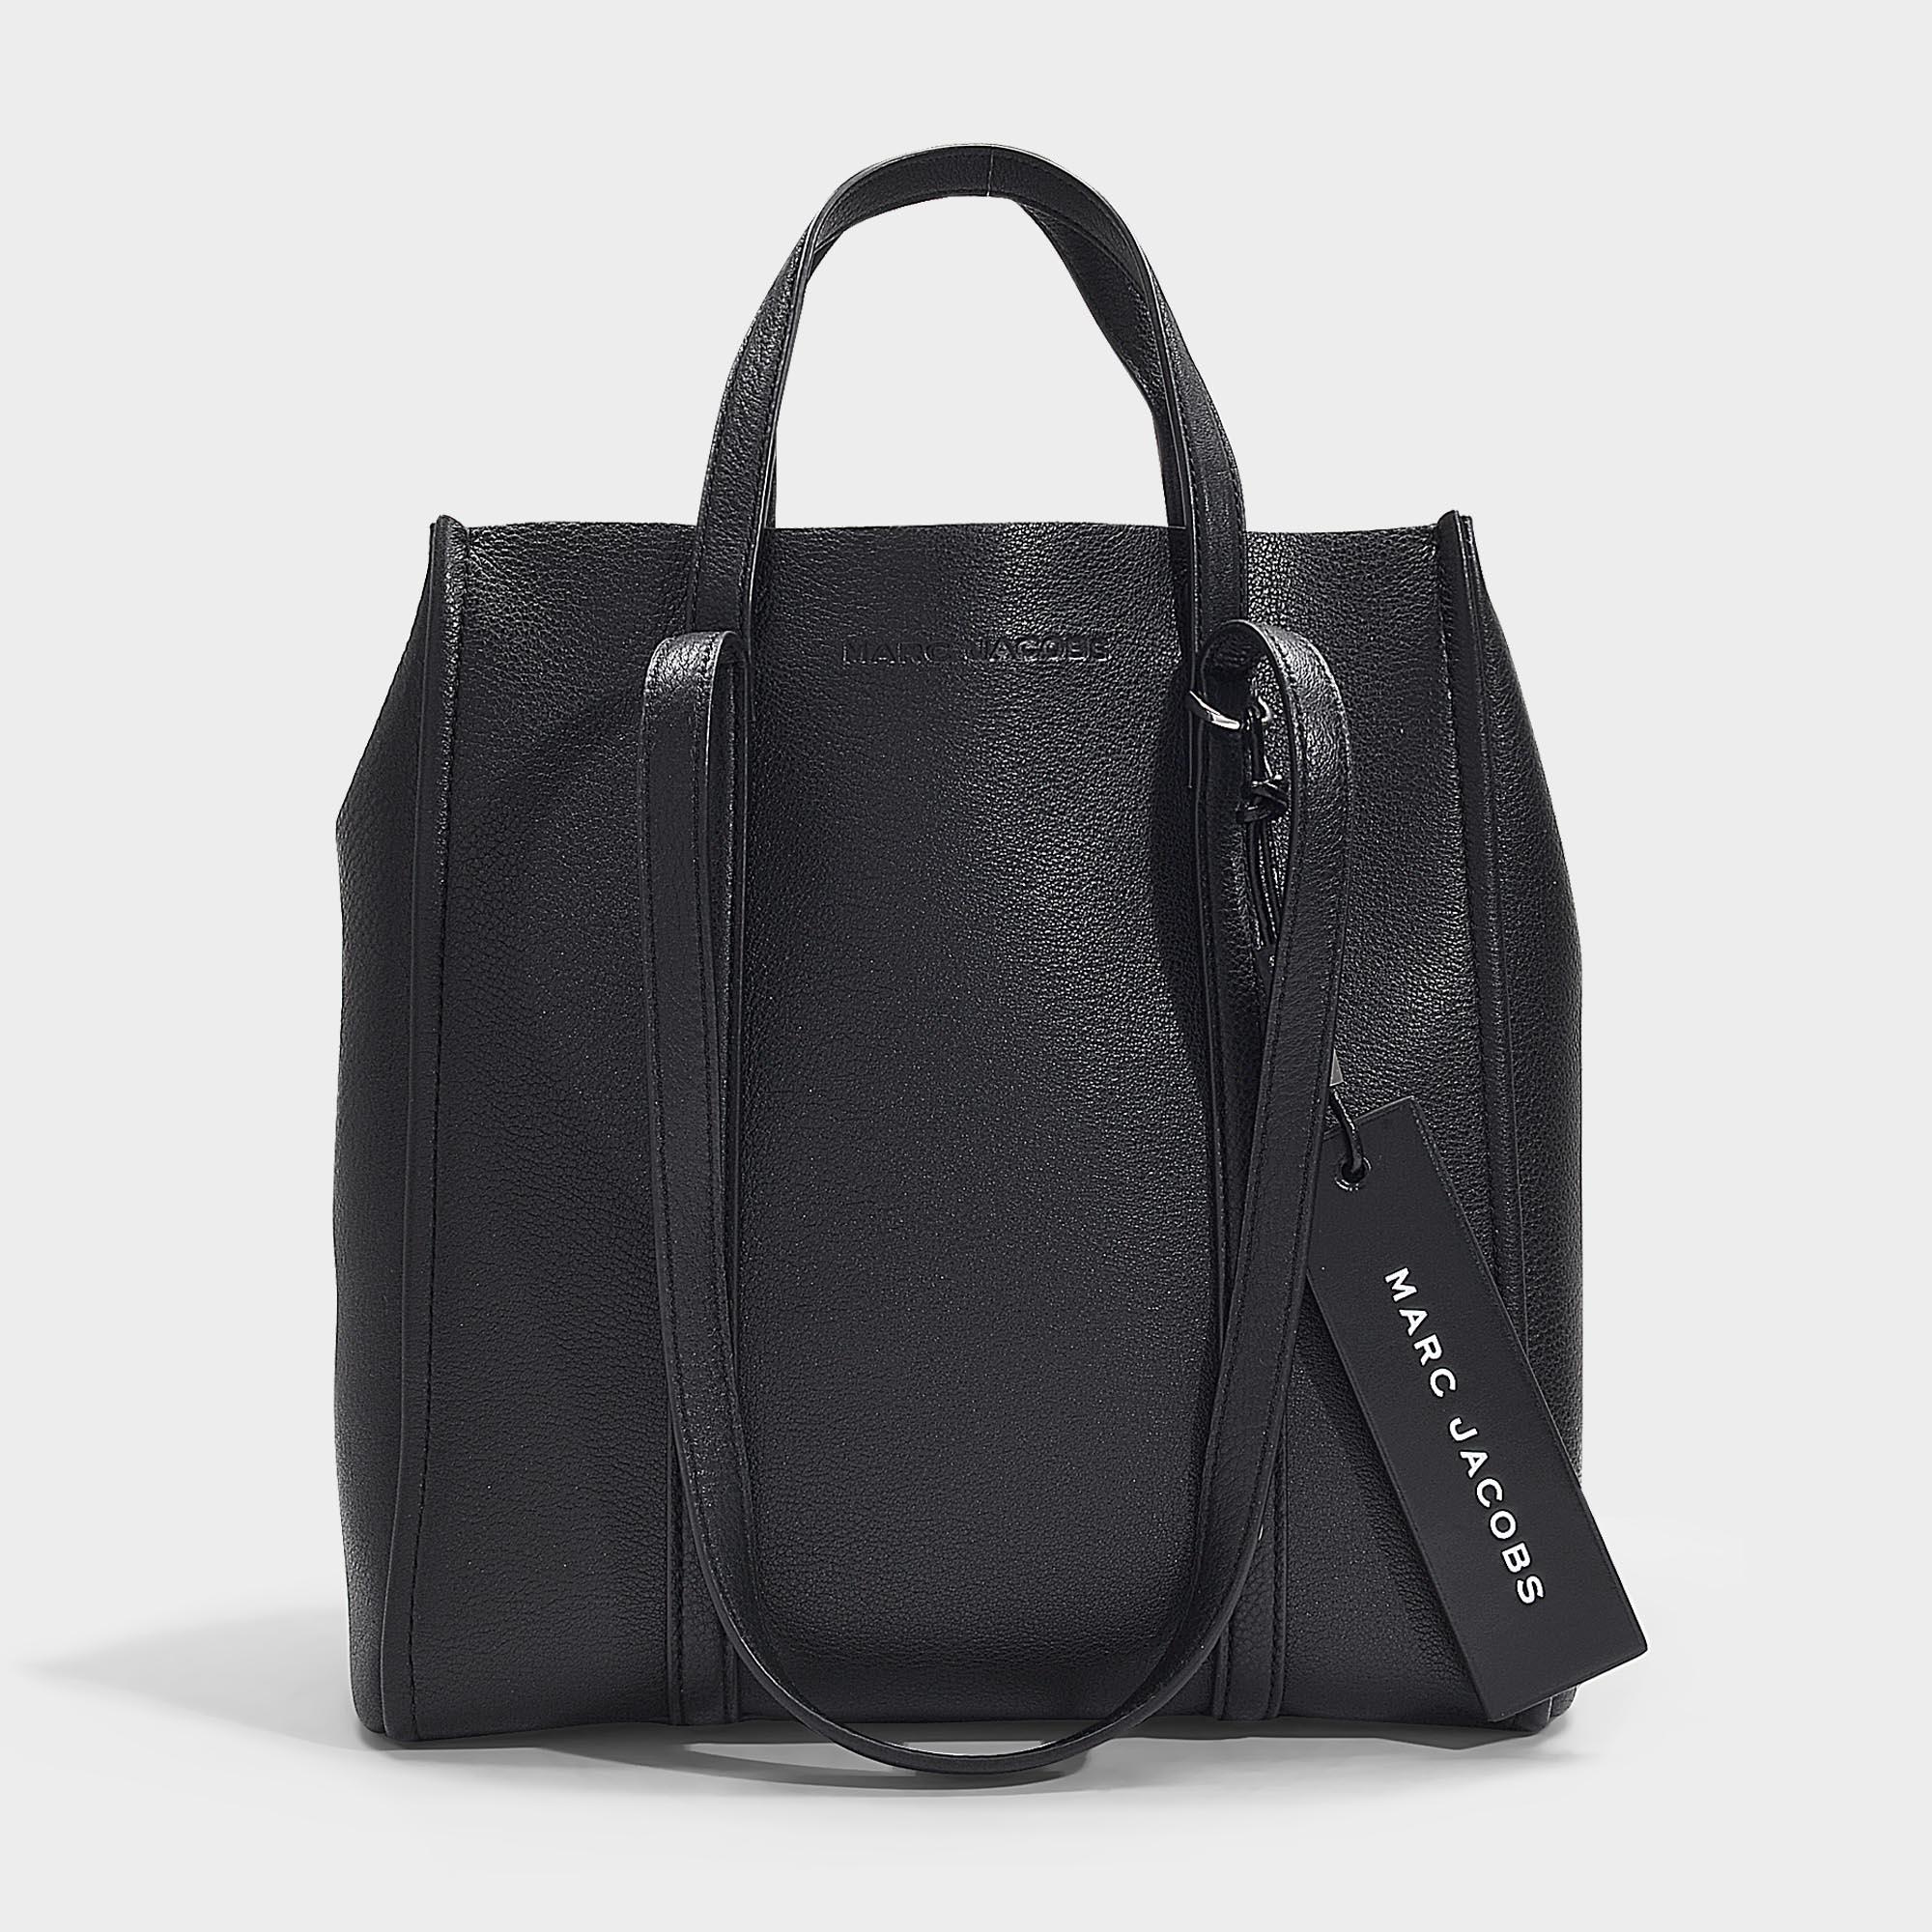 Lyst - Marc Jacobs The Tag Tote In Black Leather in Black - Save 18%